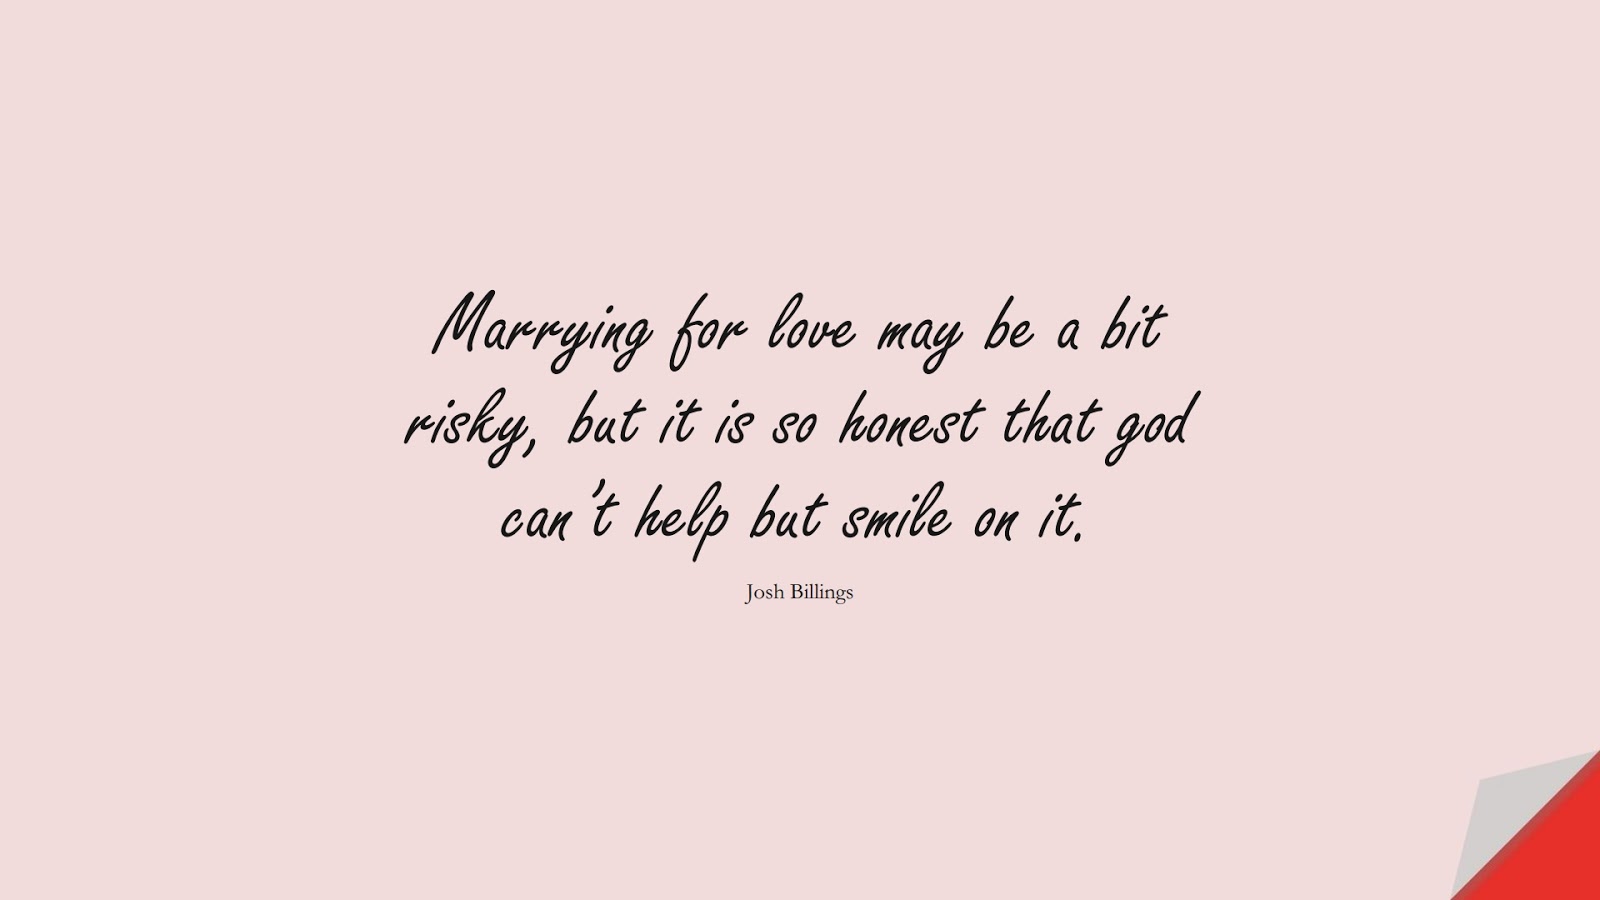 Marrying for love may be a bit risky, but it is so honest that god can’t help but smile on it. (Josh Billings);  #RelationshipQuotes